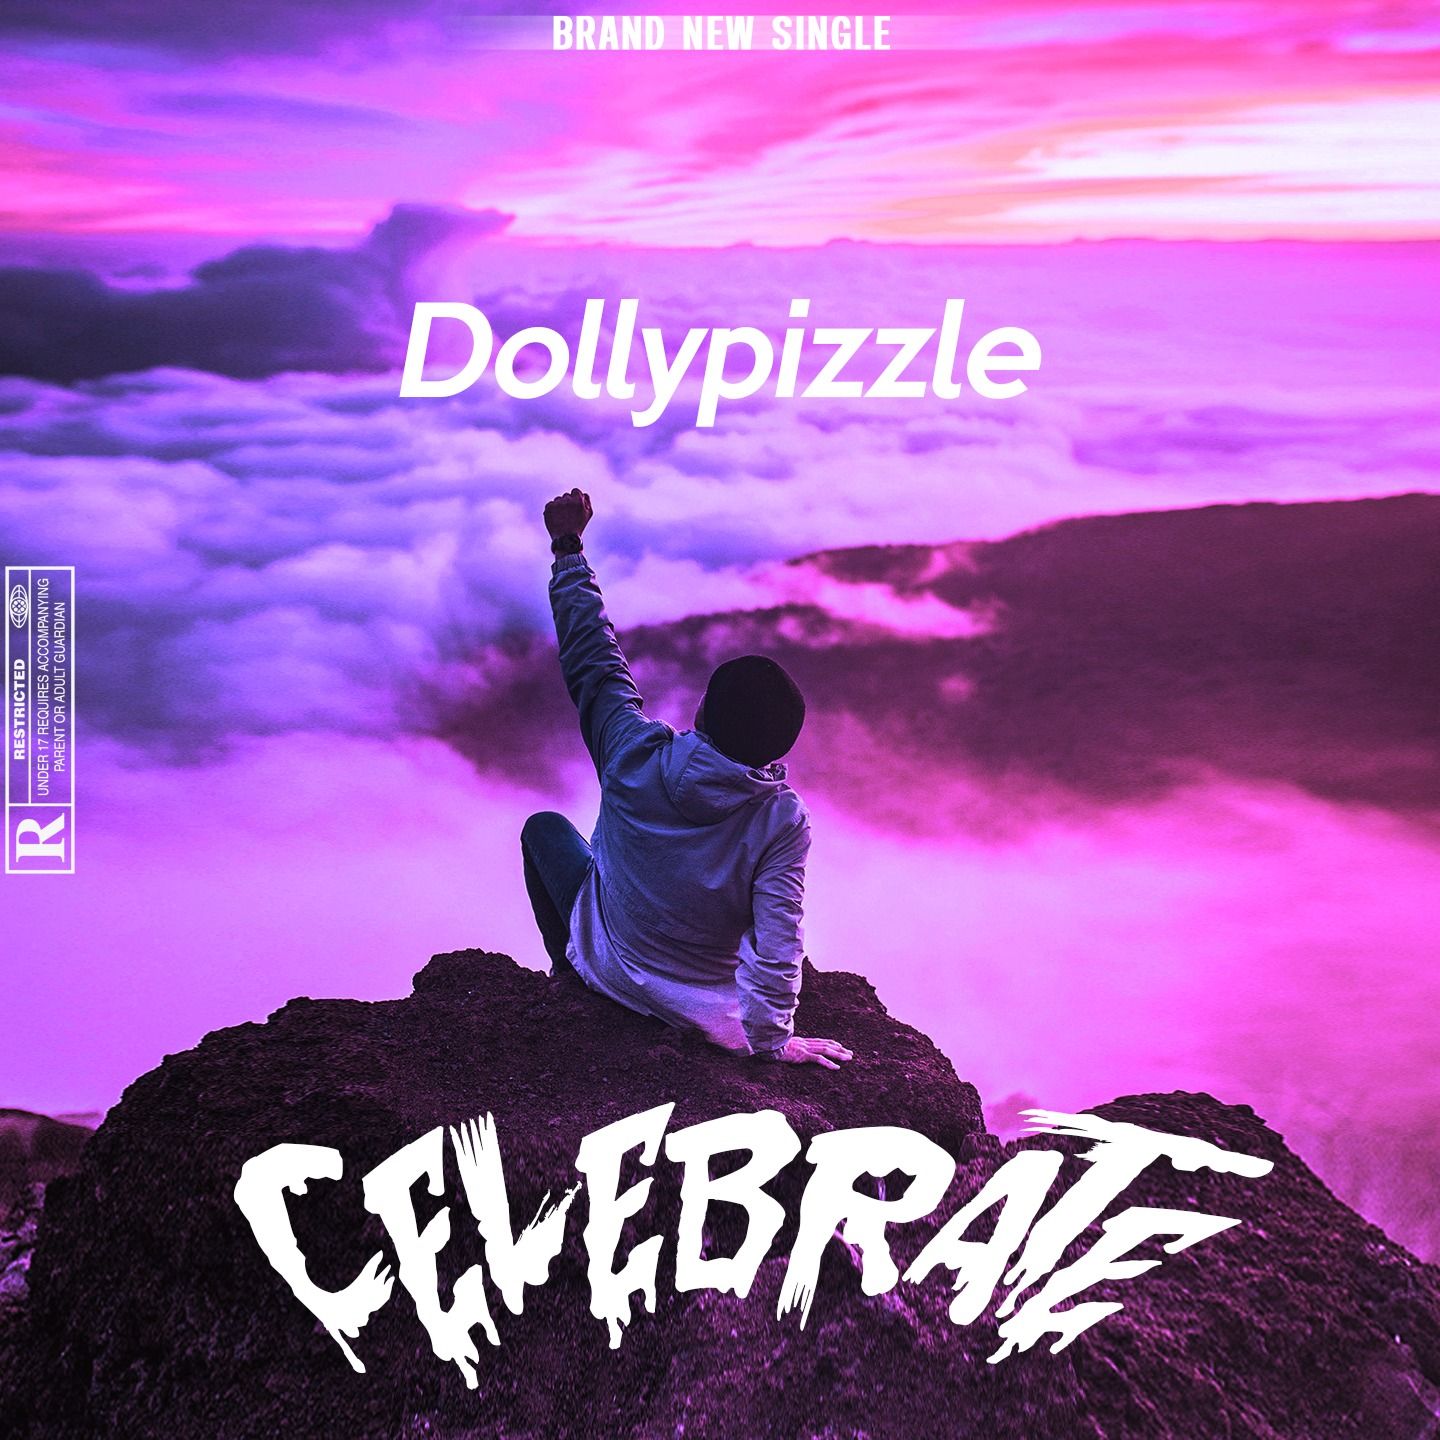 Dollypizzle – Celebrate mp3 download